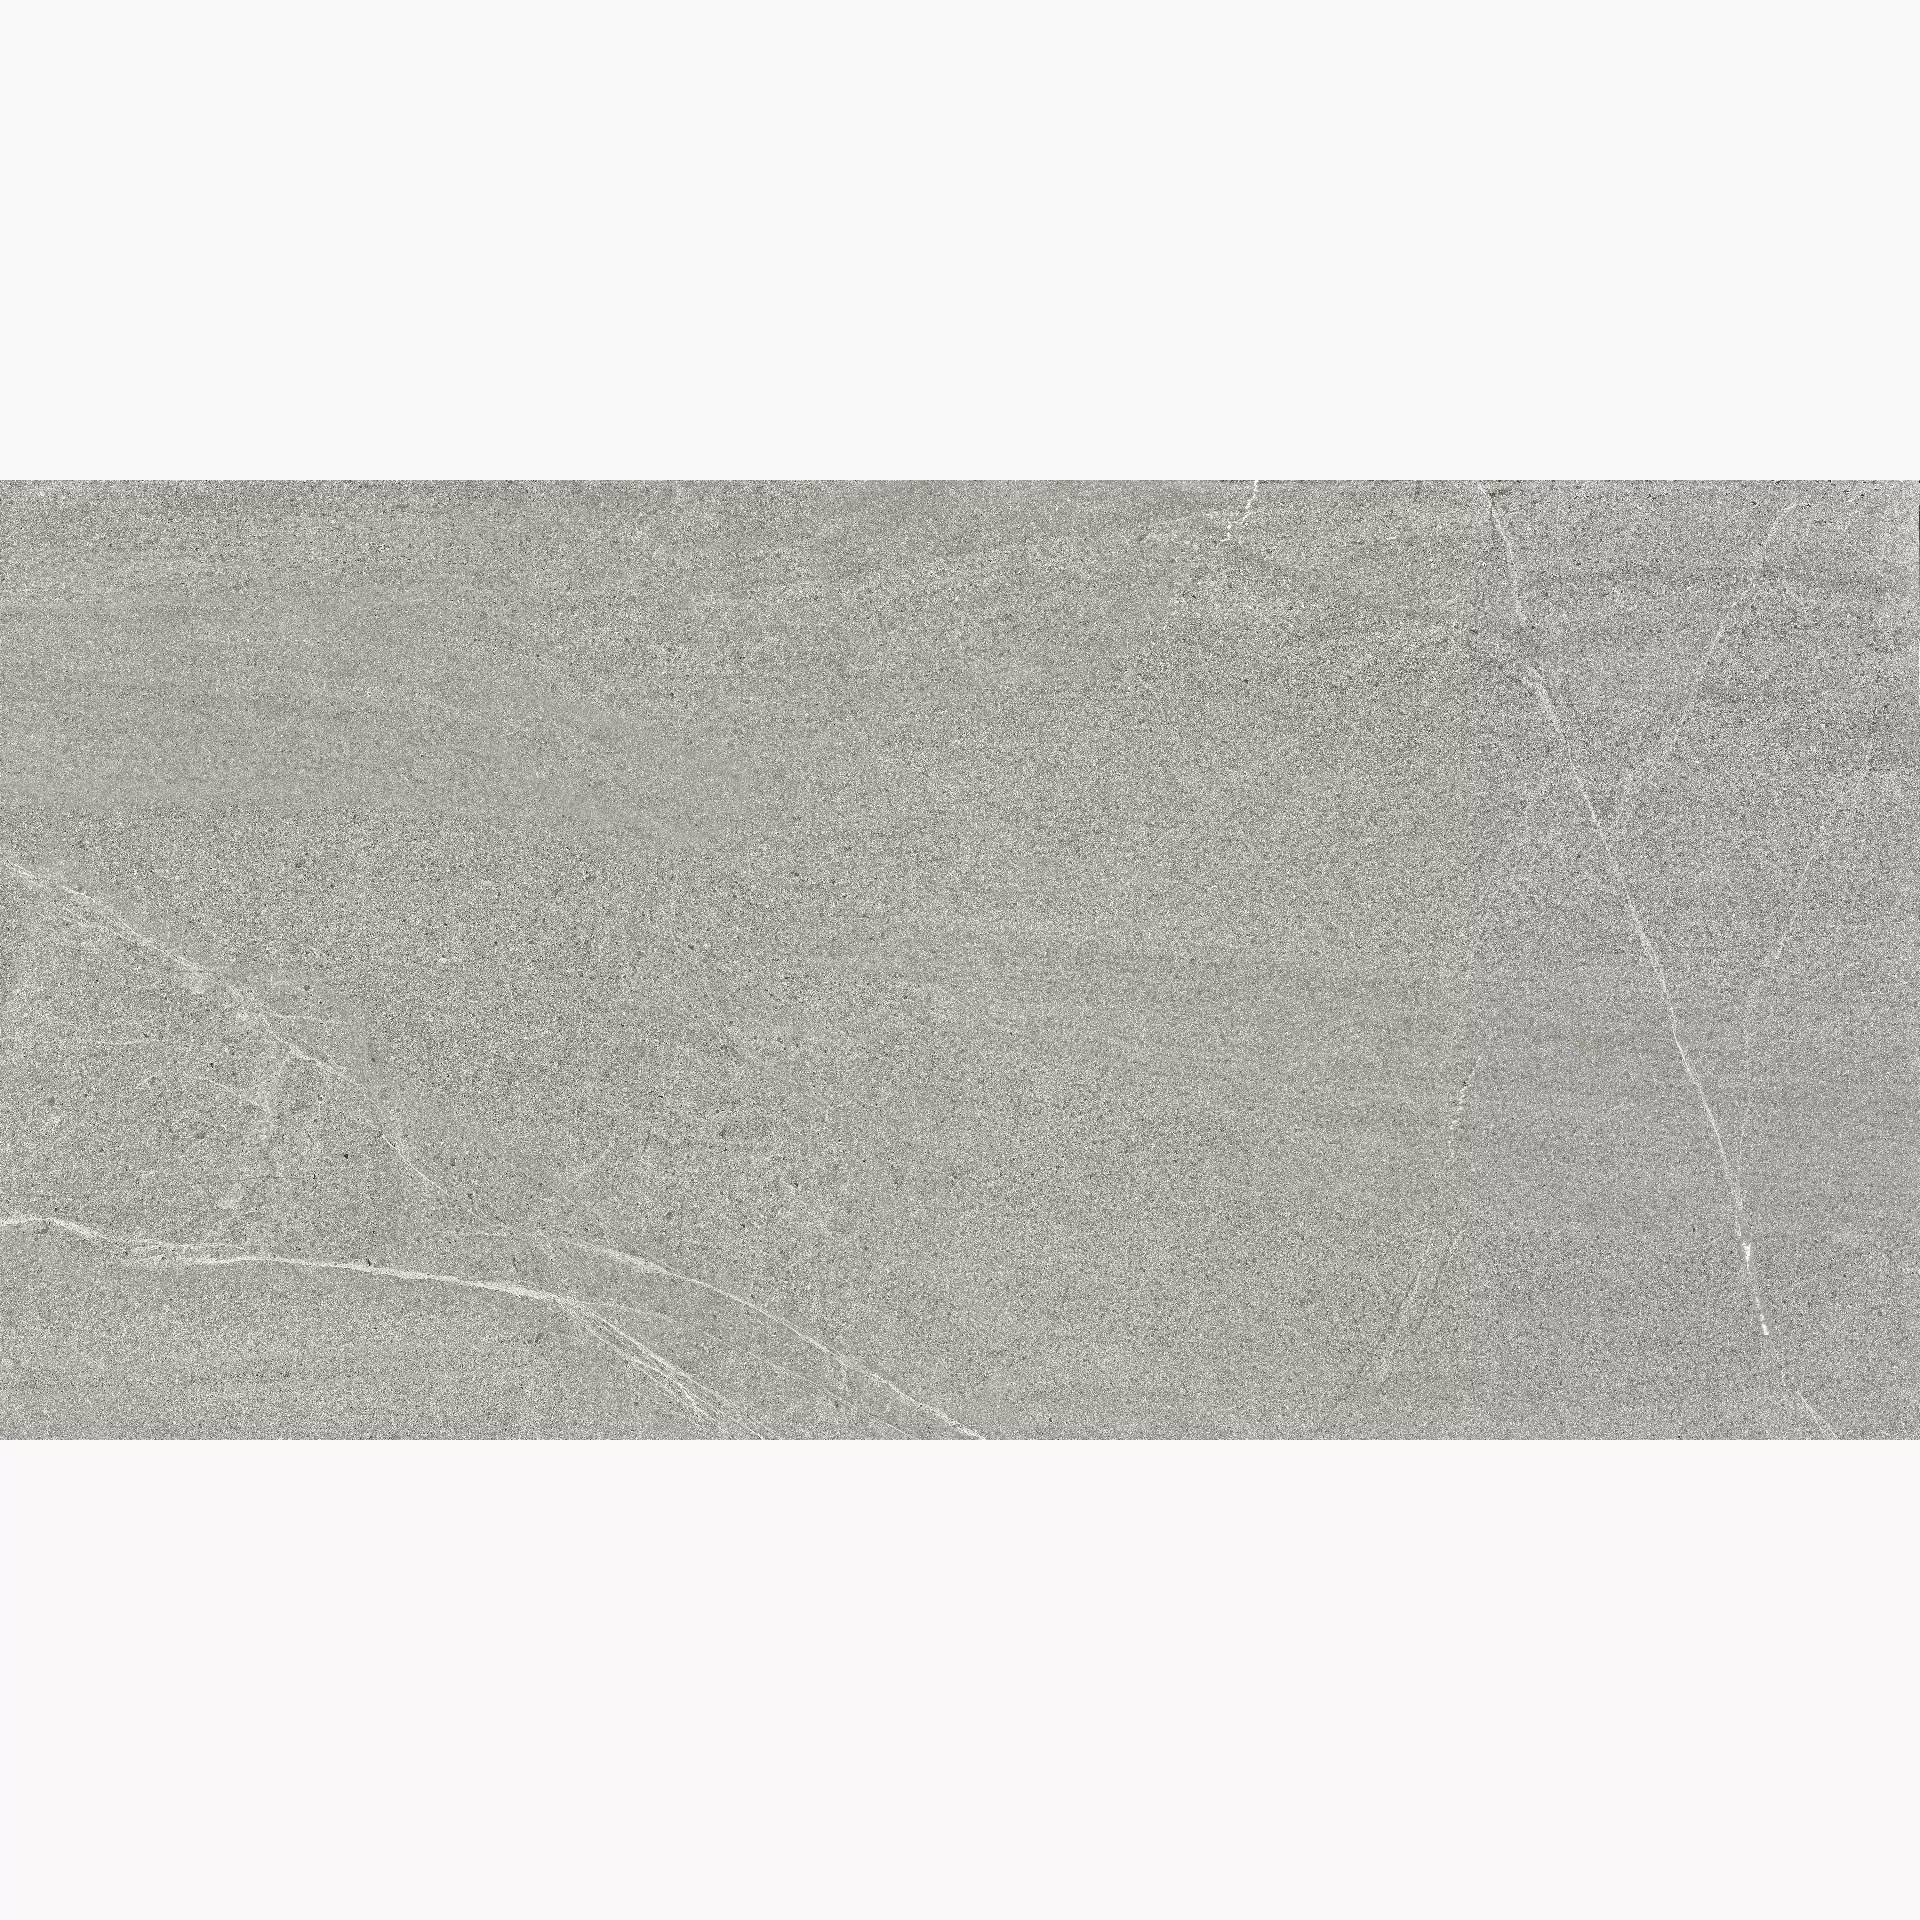 Cottodeste Limestone Oyster Naturale Protect EG-LS20 30x60cm rectified 14mm